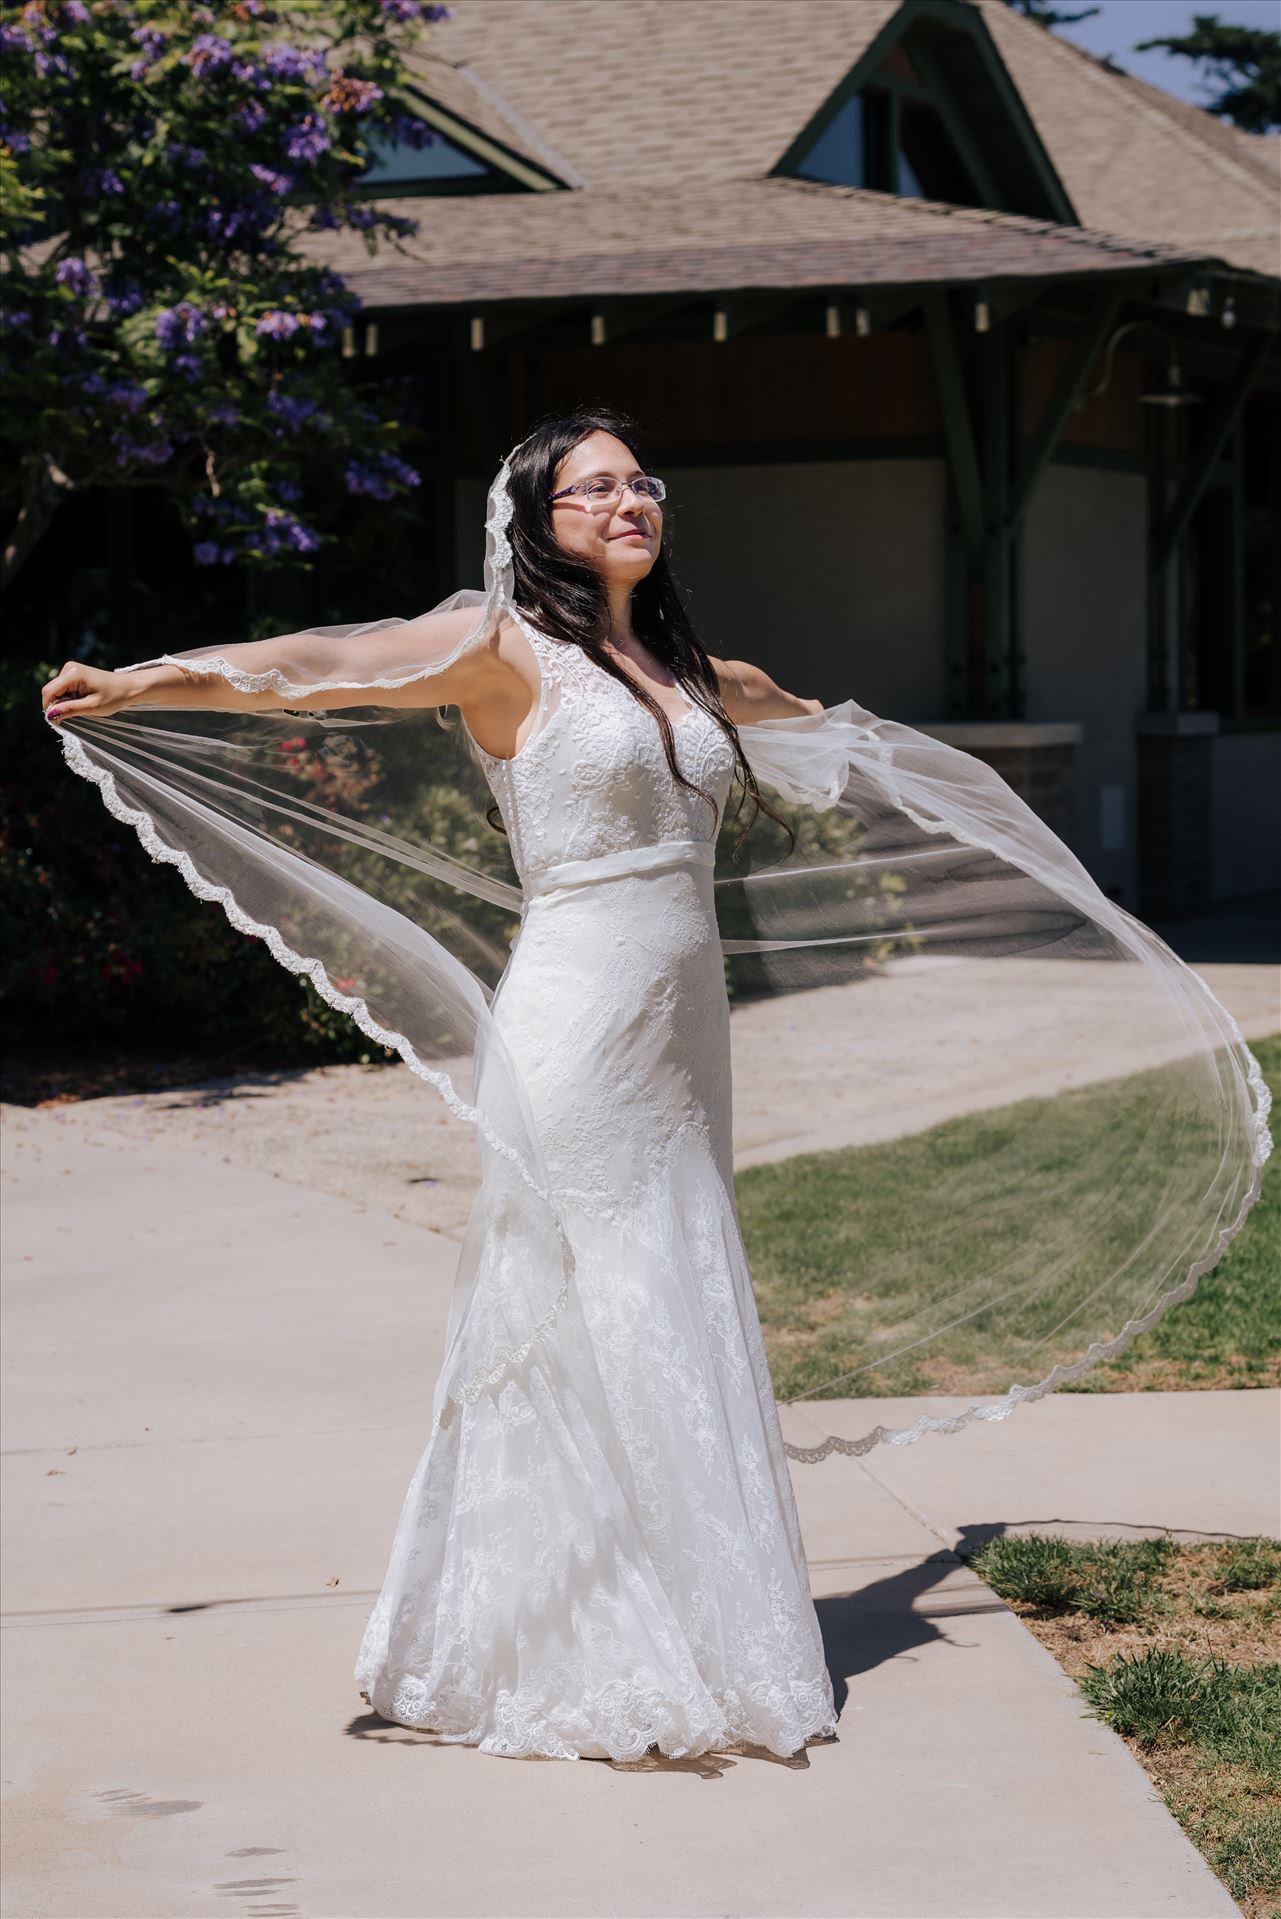 Renae and Brian 070 - Mirror's Edge Photography captures a high tea wedding at the Cypress Ridge Golf Club and Pavilion in Arroyo Grande, California.  A happy bride by Sarah Williams